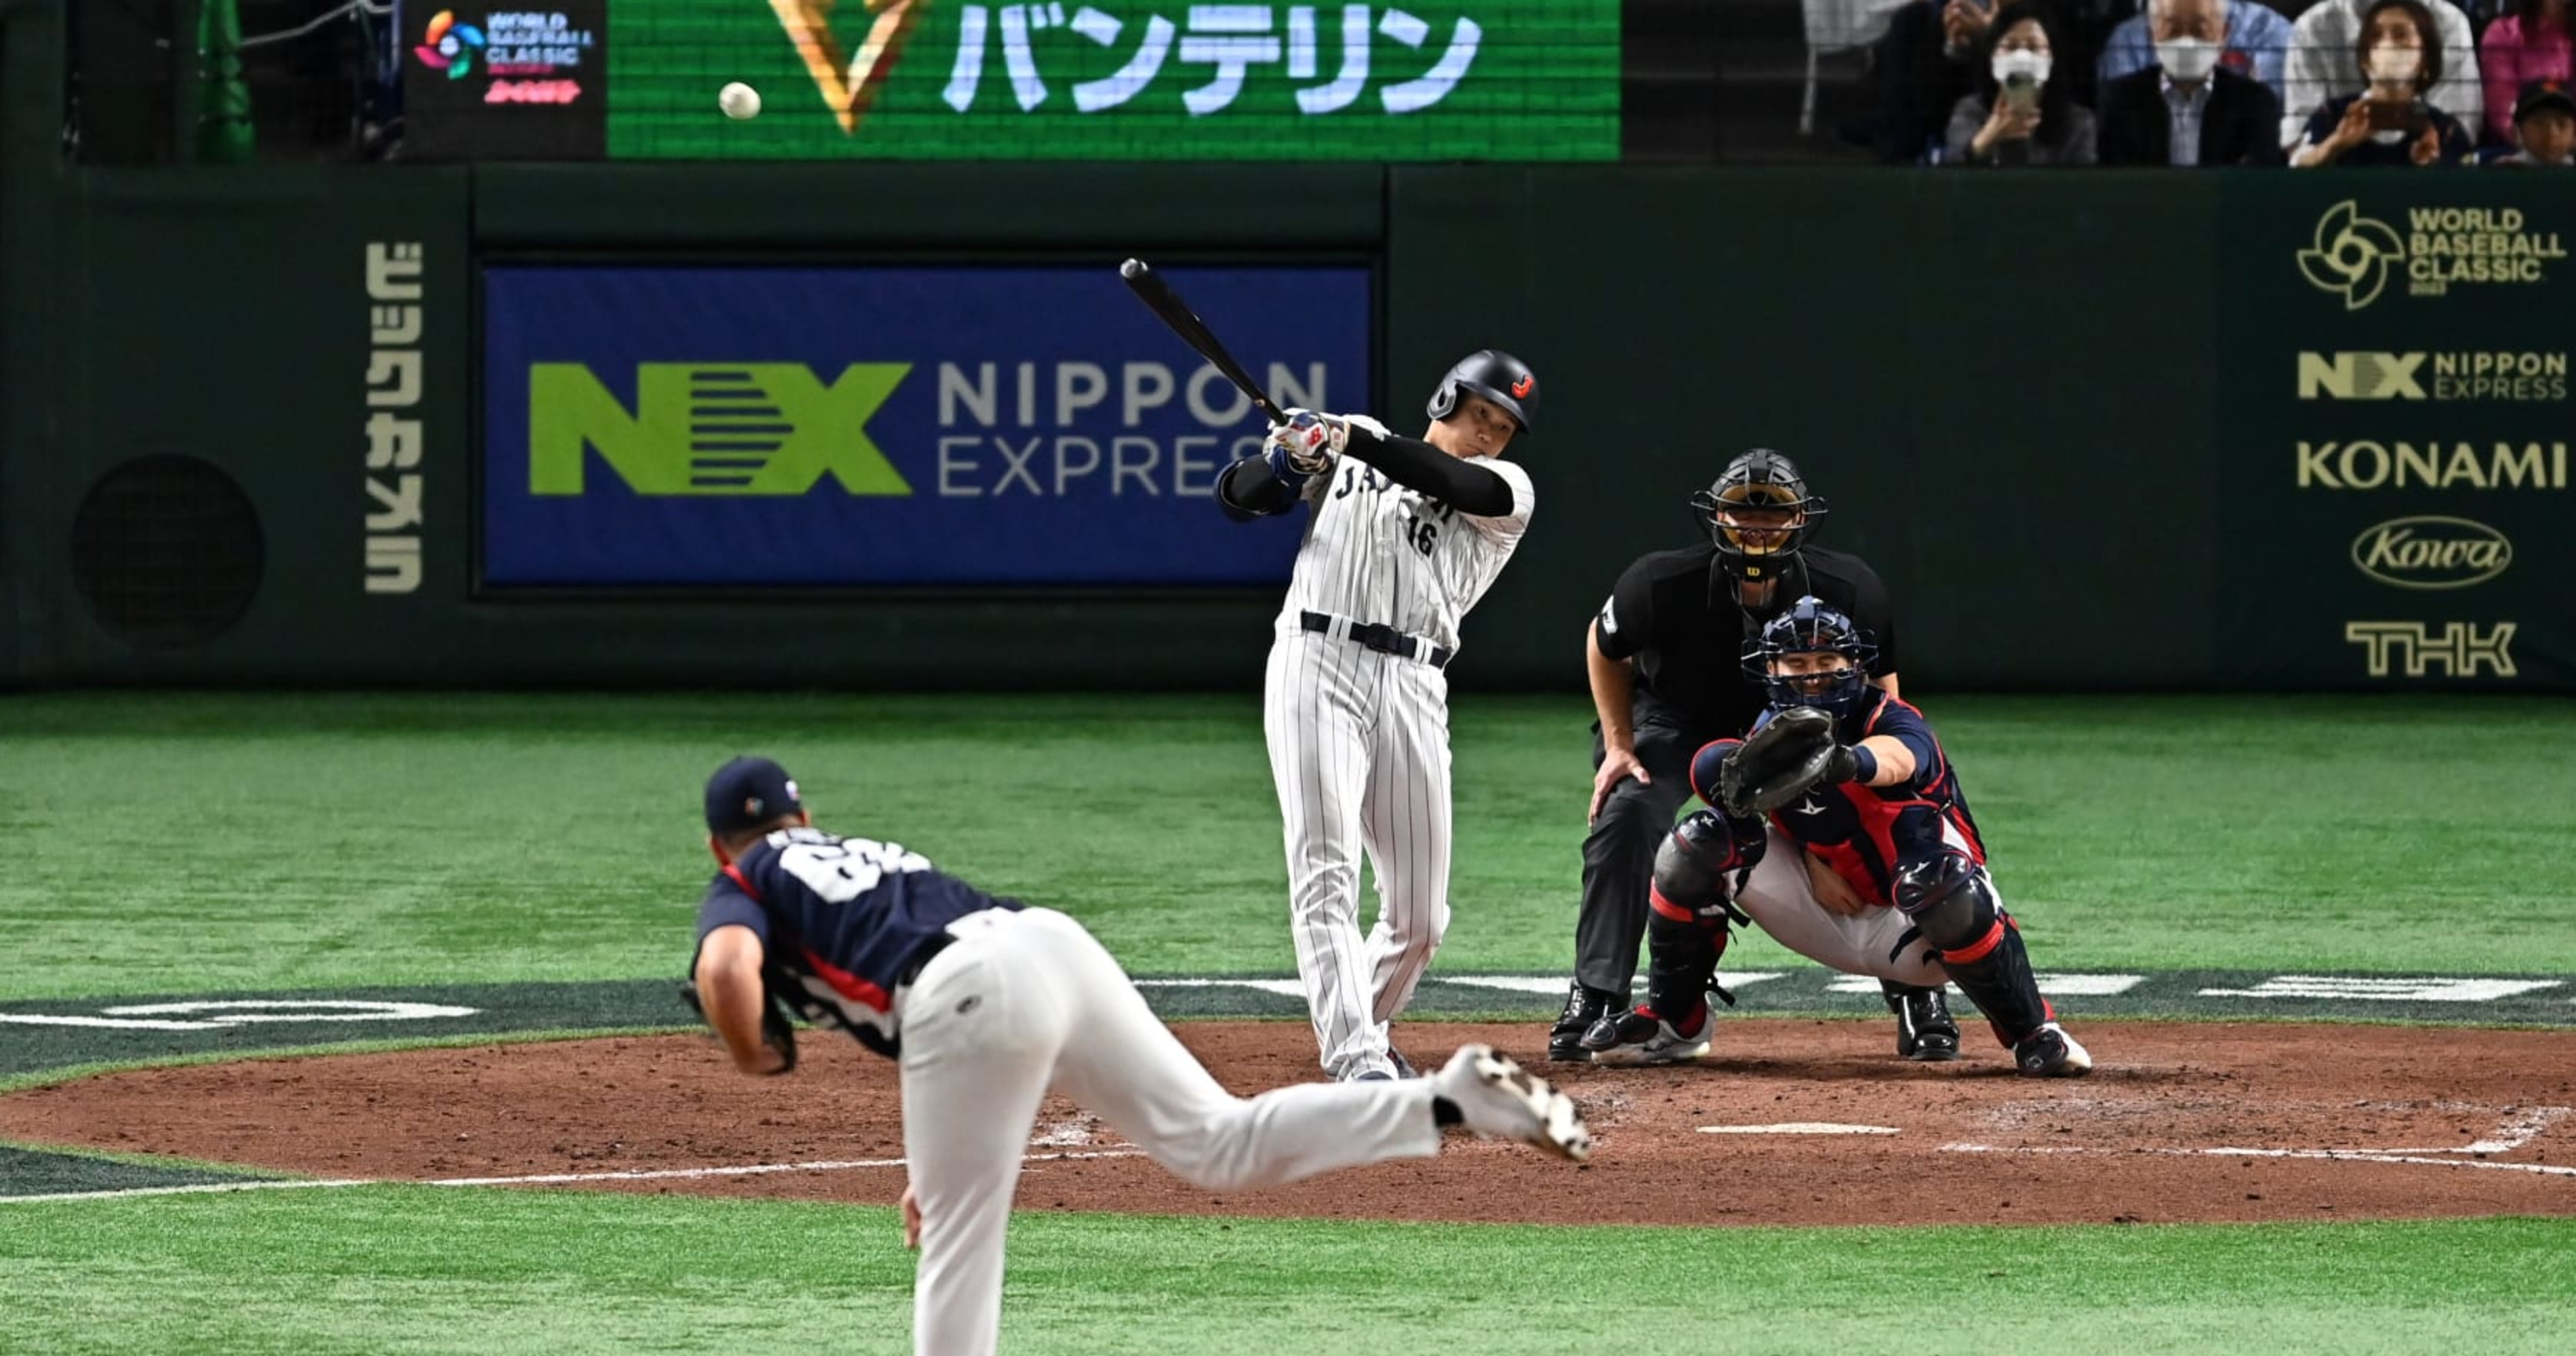 Czech Electrician Playing on WBC Team Strikes Out Shohei Ohtani